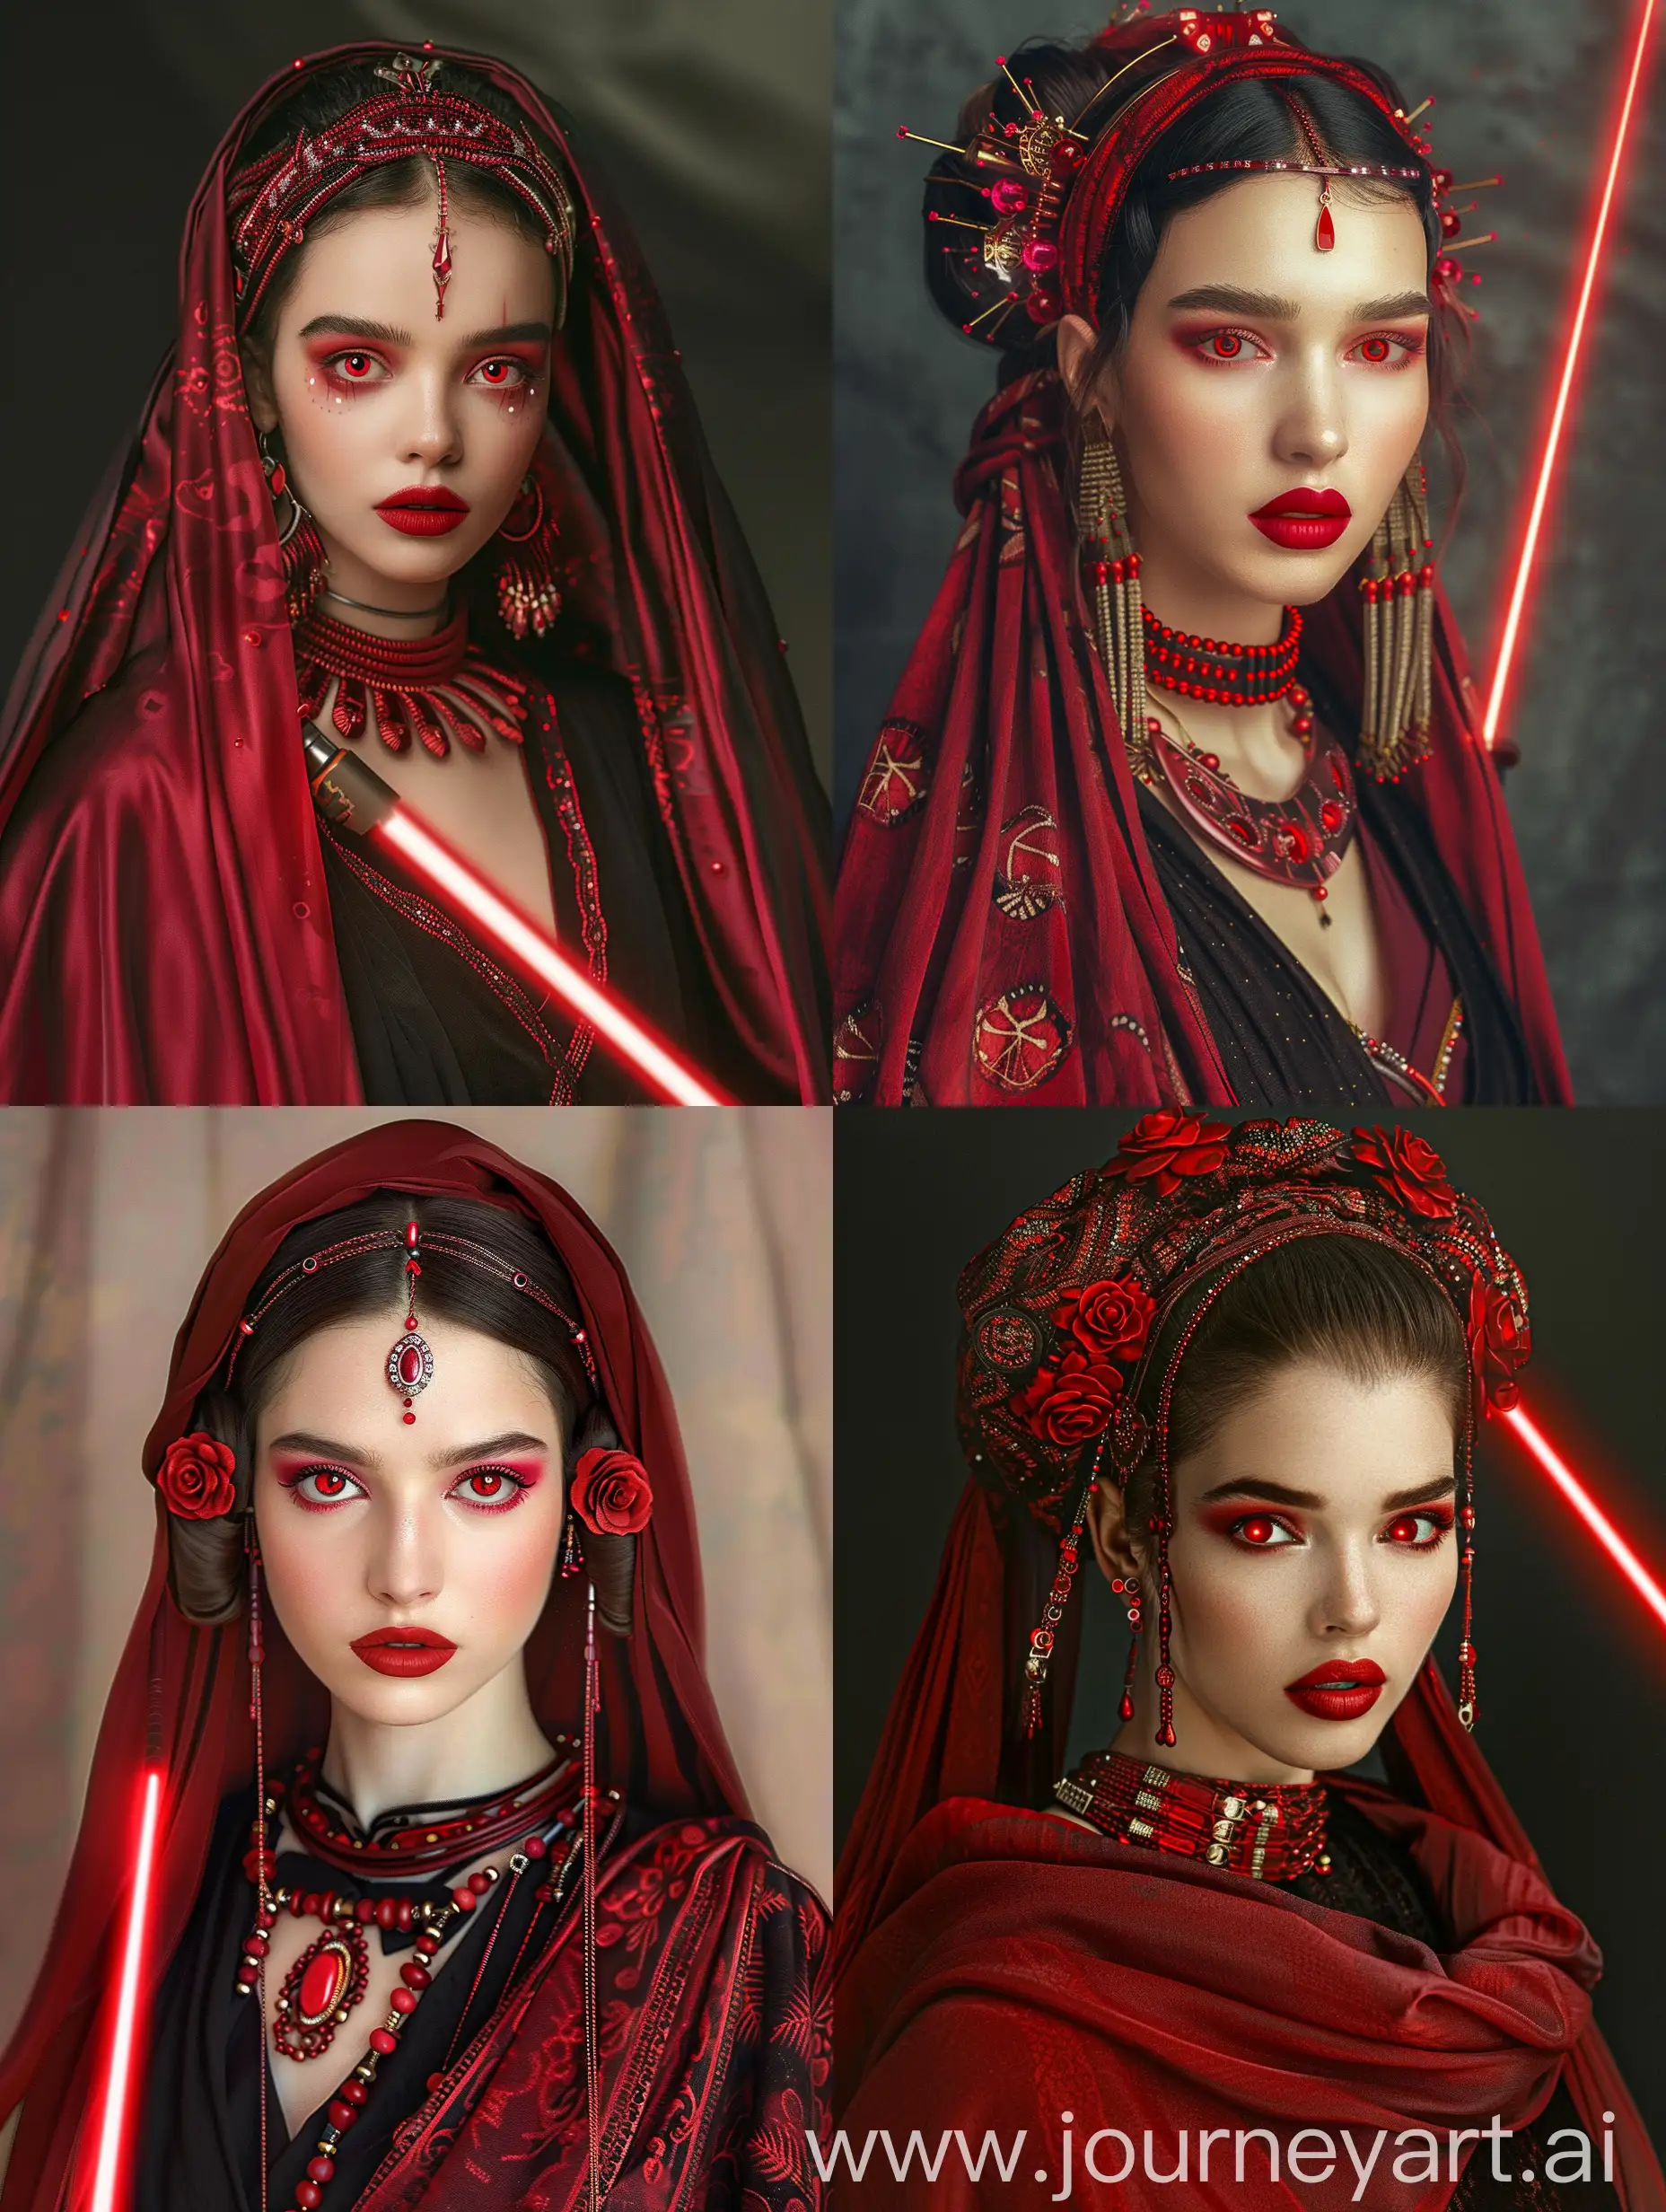 Sith-Apprentice-with-Red-Lightsaber-and-Jewelryadorned-Red-Outfit